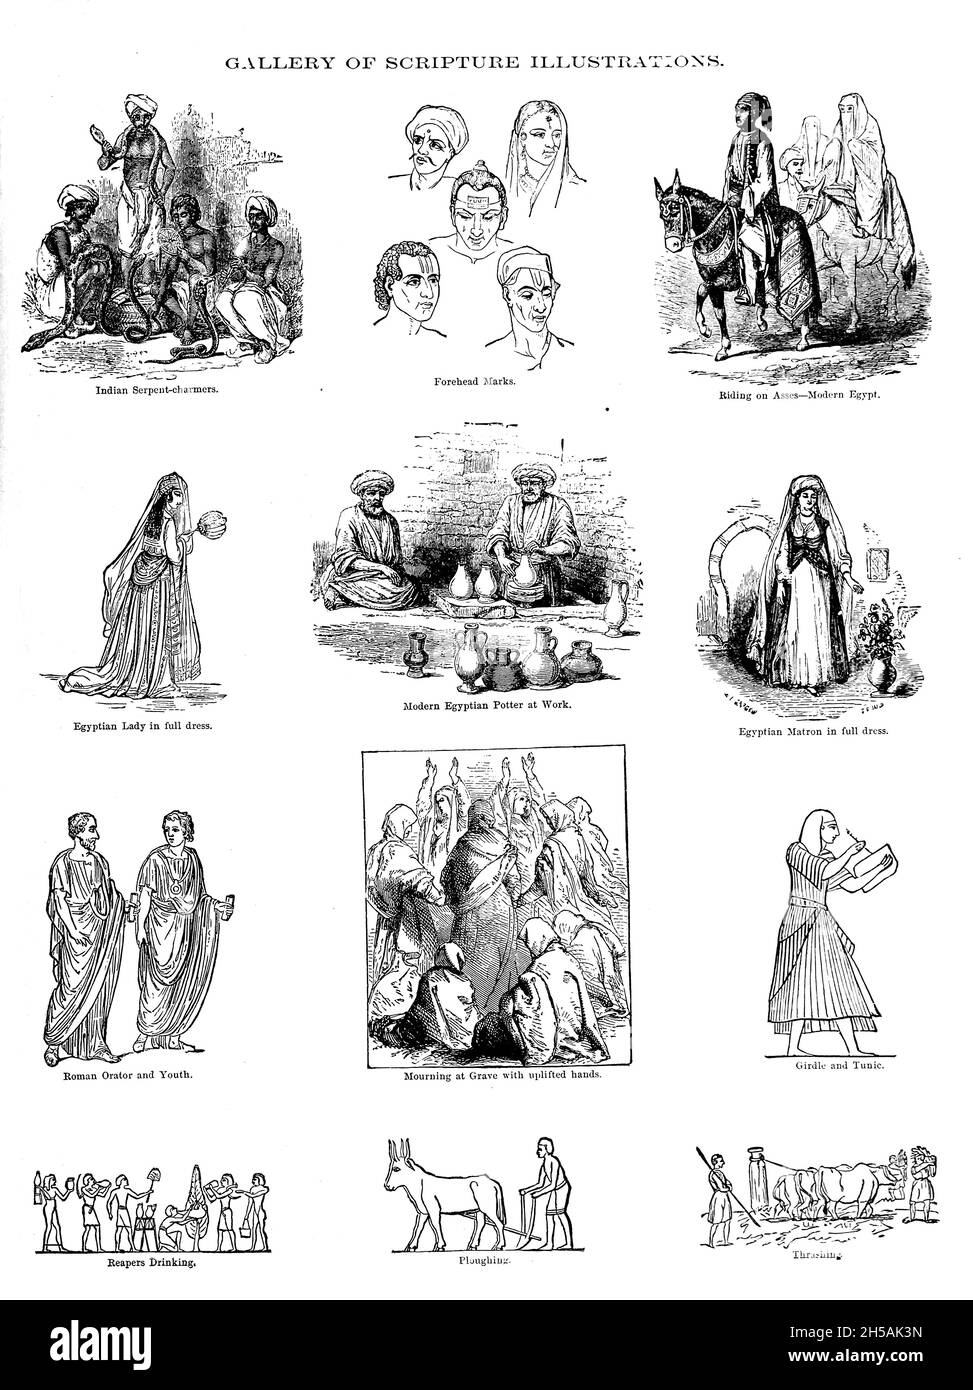 Gallery of Scripture Illustrations of Biblical Lifestyle and Fashion from ' The Doré family Bible ' containing the Old and New Testaments, The Apocrypha Embellished with Fine Full-Page Engravings, Illustrations and the Dore Bible Gallery. Published in Philadelphia by William T. Amies in 1883 Stock Photo